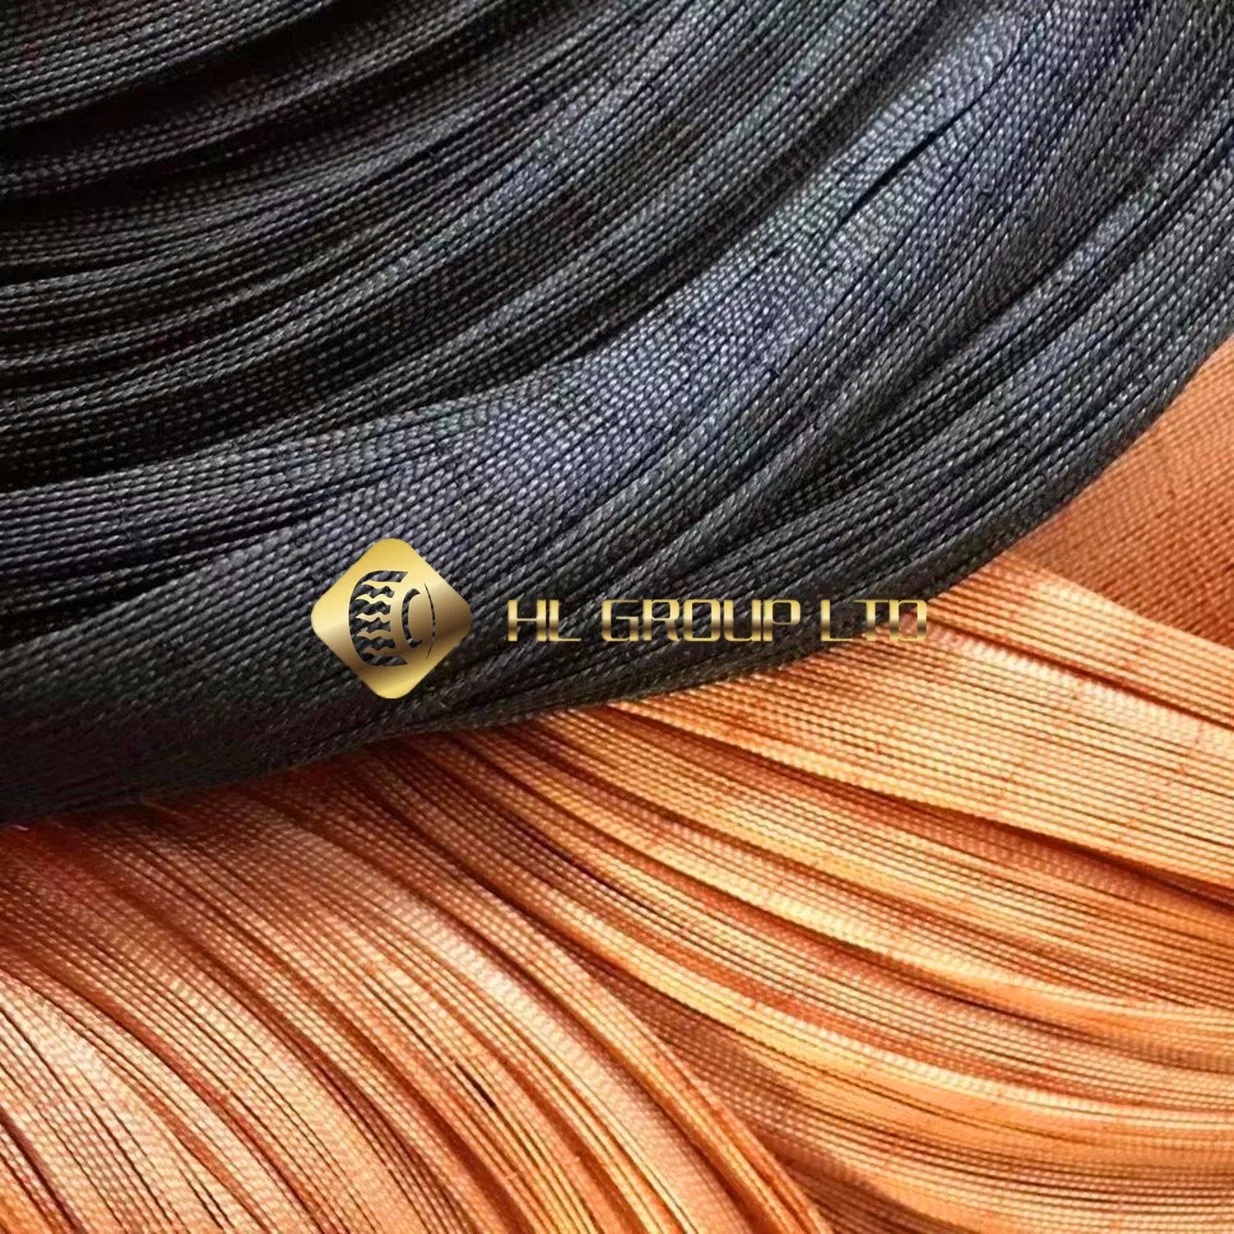 1300d/2 Tire Cord Fabric Secondary Grade Used for Making Fishing Net and Ropes